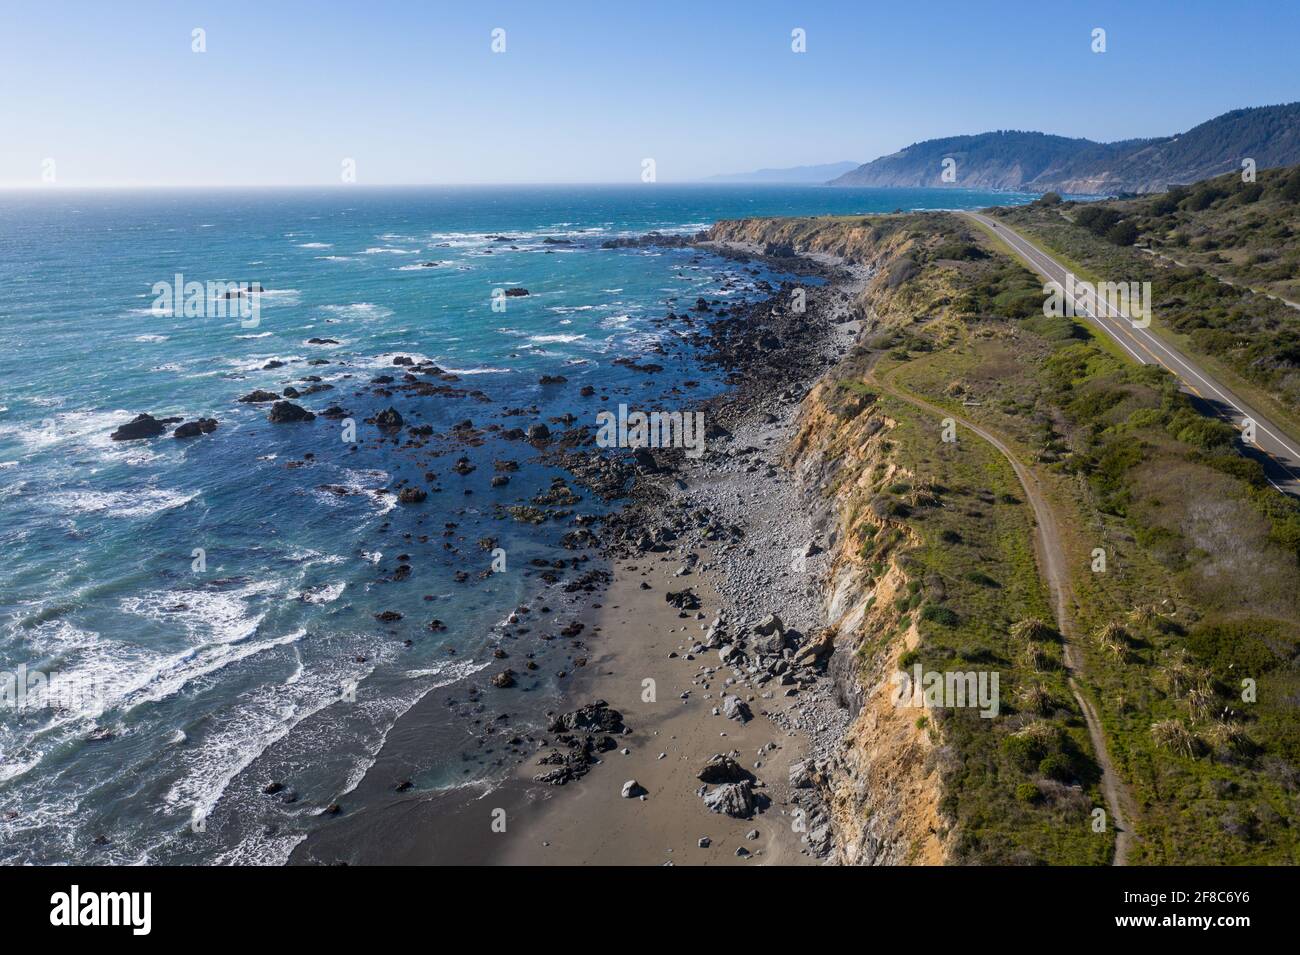 The Pacific Ocean meets the rocky shore of Northern California in Mendocino. This scenic region is known for its beautiful, rugged coastlines. Stock Photo